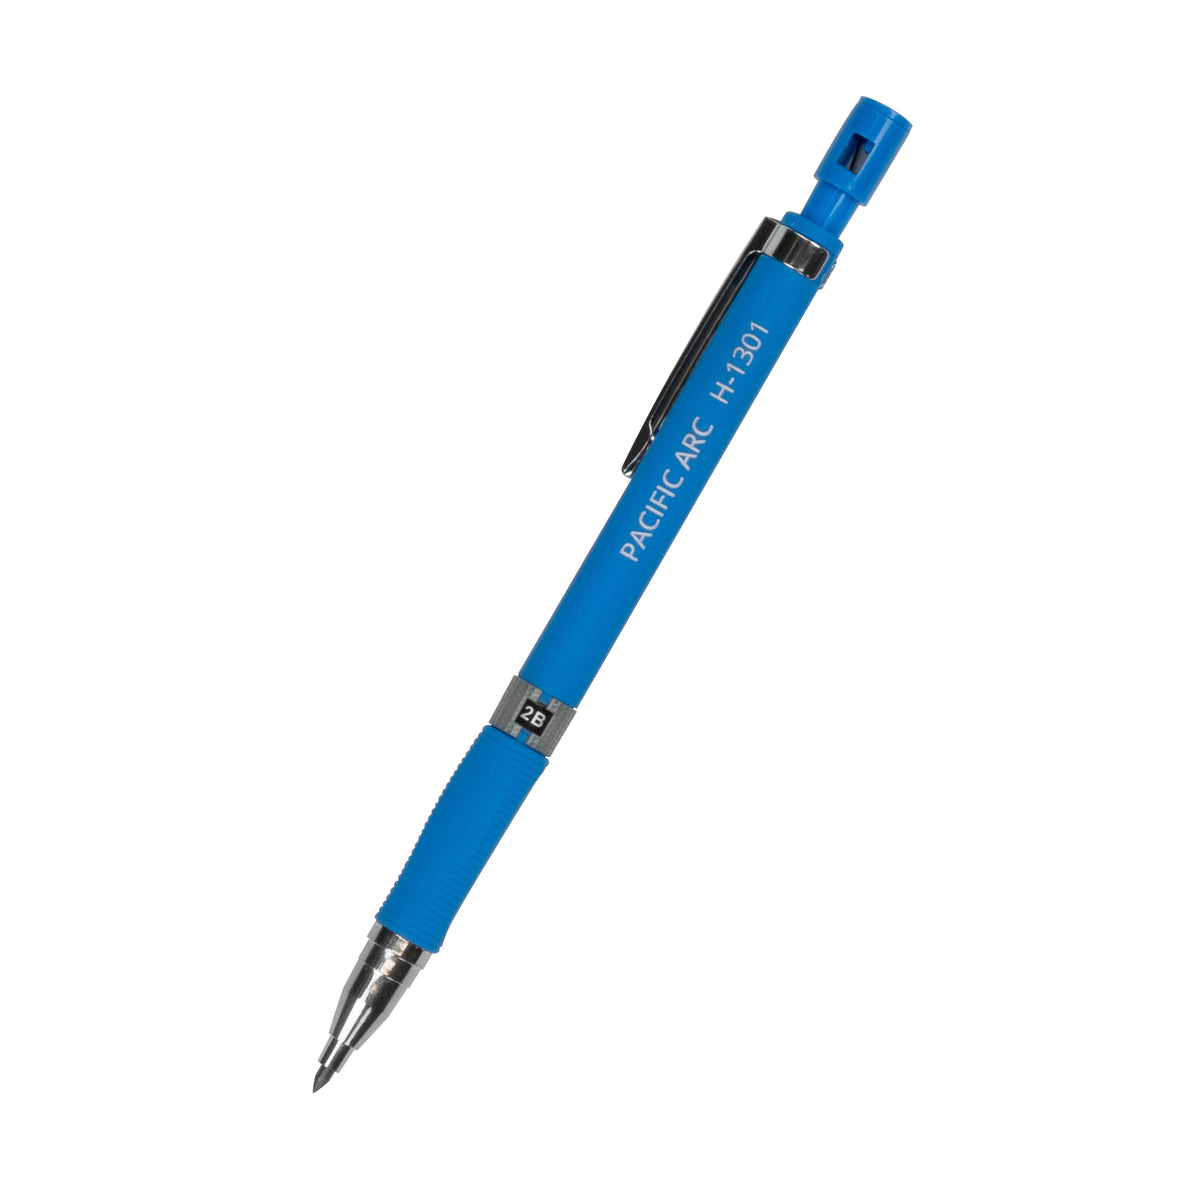 2mm Collegiate Lead Holder and Lead Sharpener, Parent Drafting Pencil for Artist Drawing, Drafting, and Sketching (Blue)